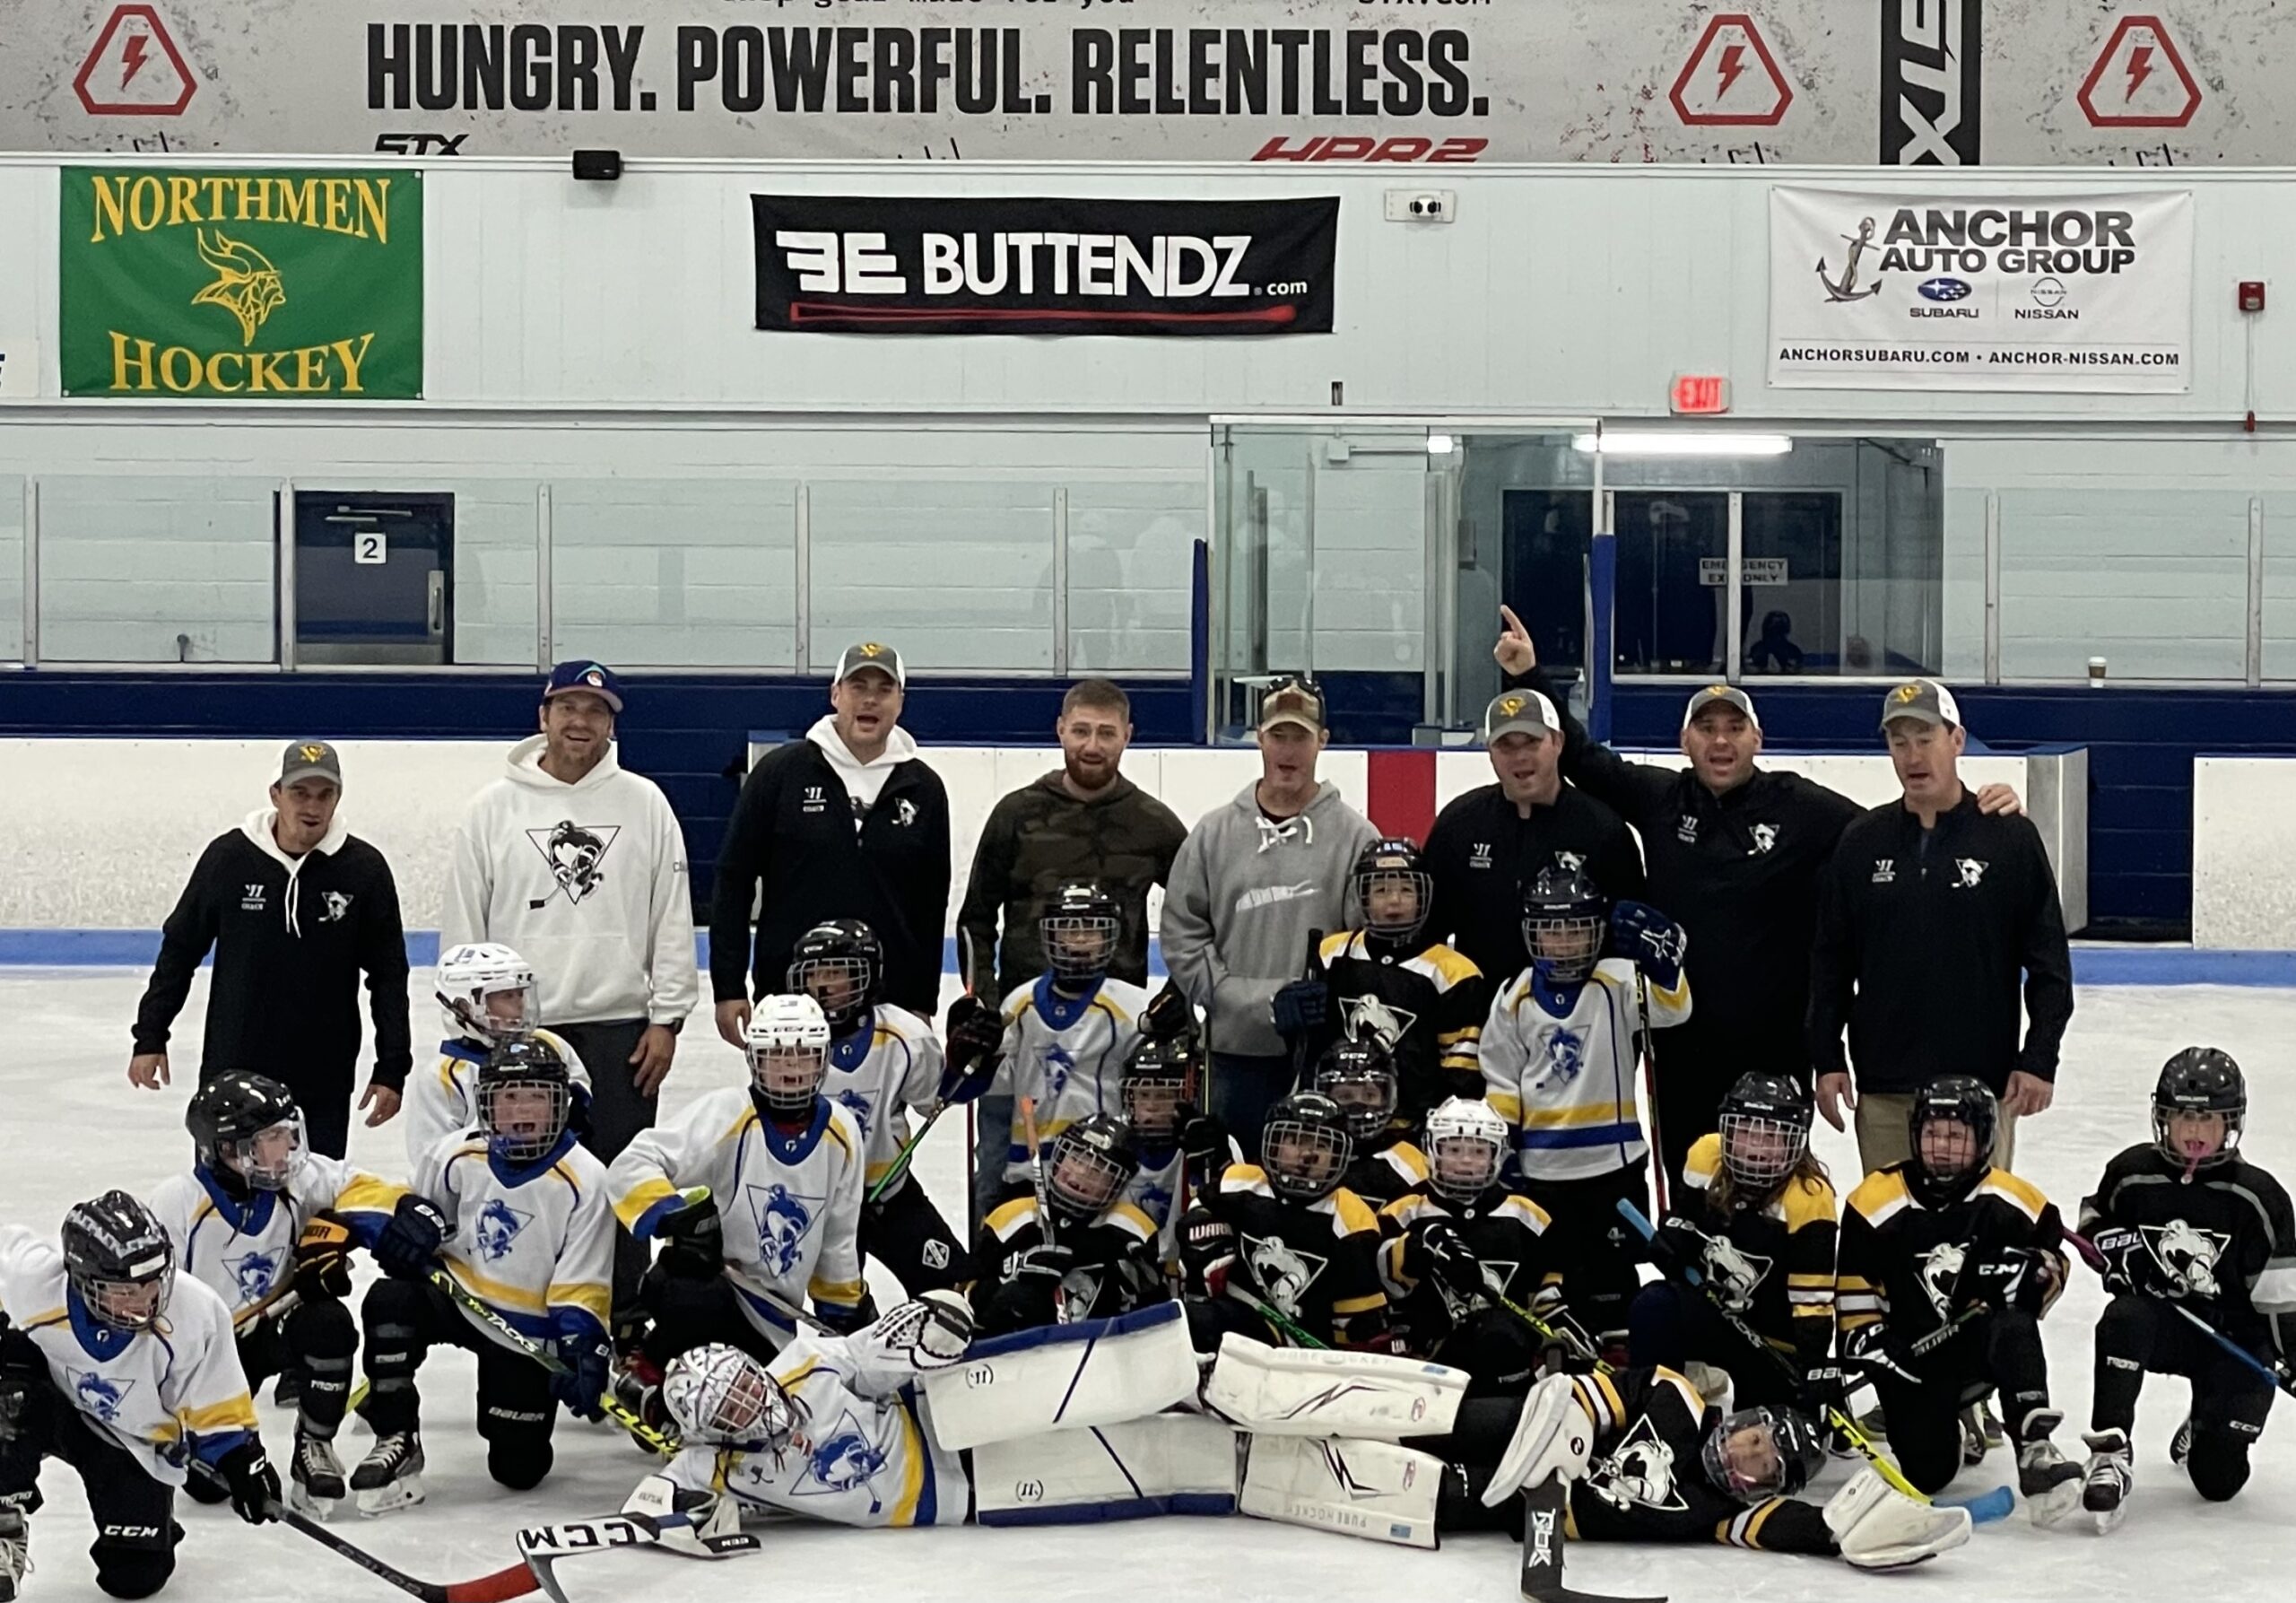 The Southampton Penguins 8-and-under ice hockey team took second place after competing at the Lobsterfest Tournament in Rhode Island over the weekend.